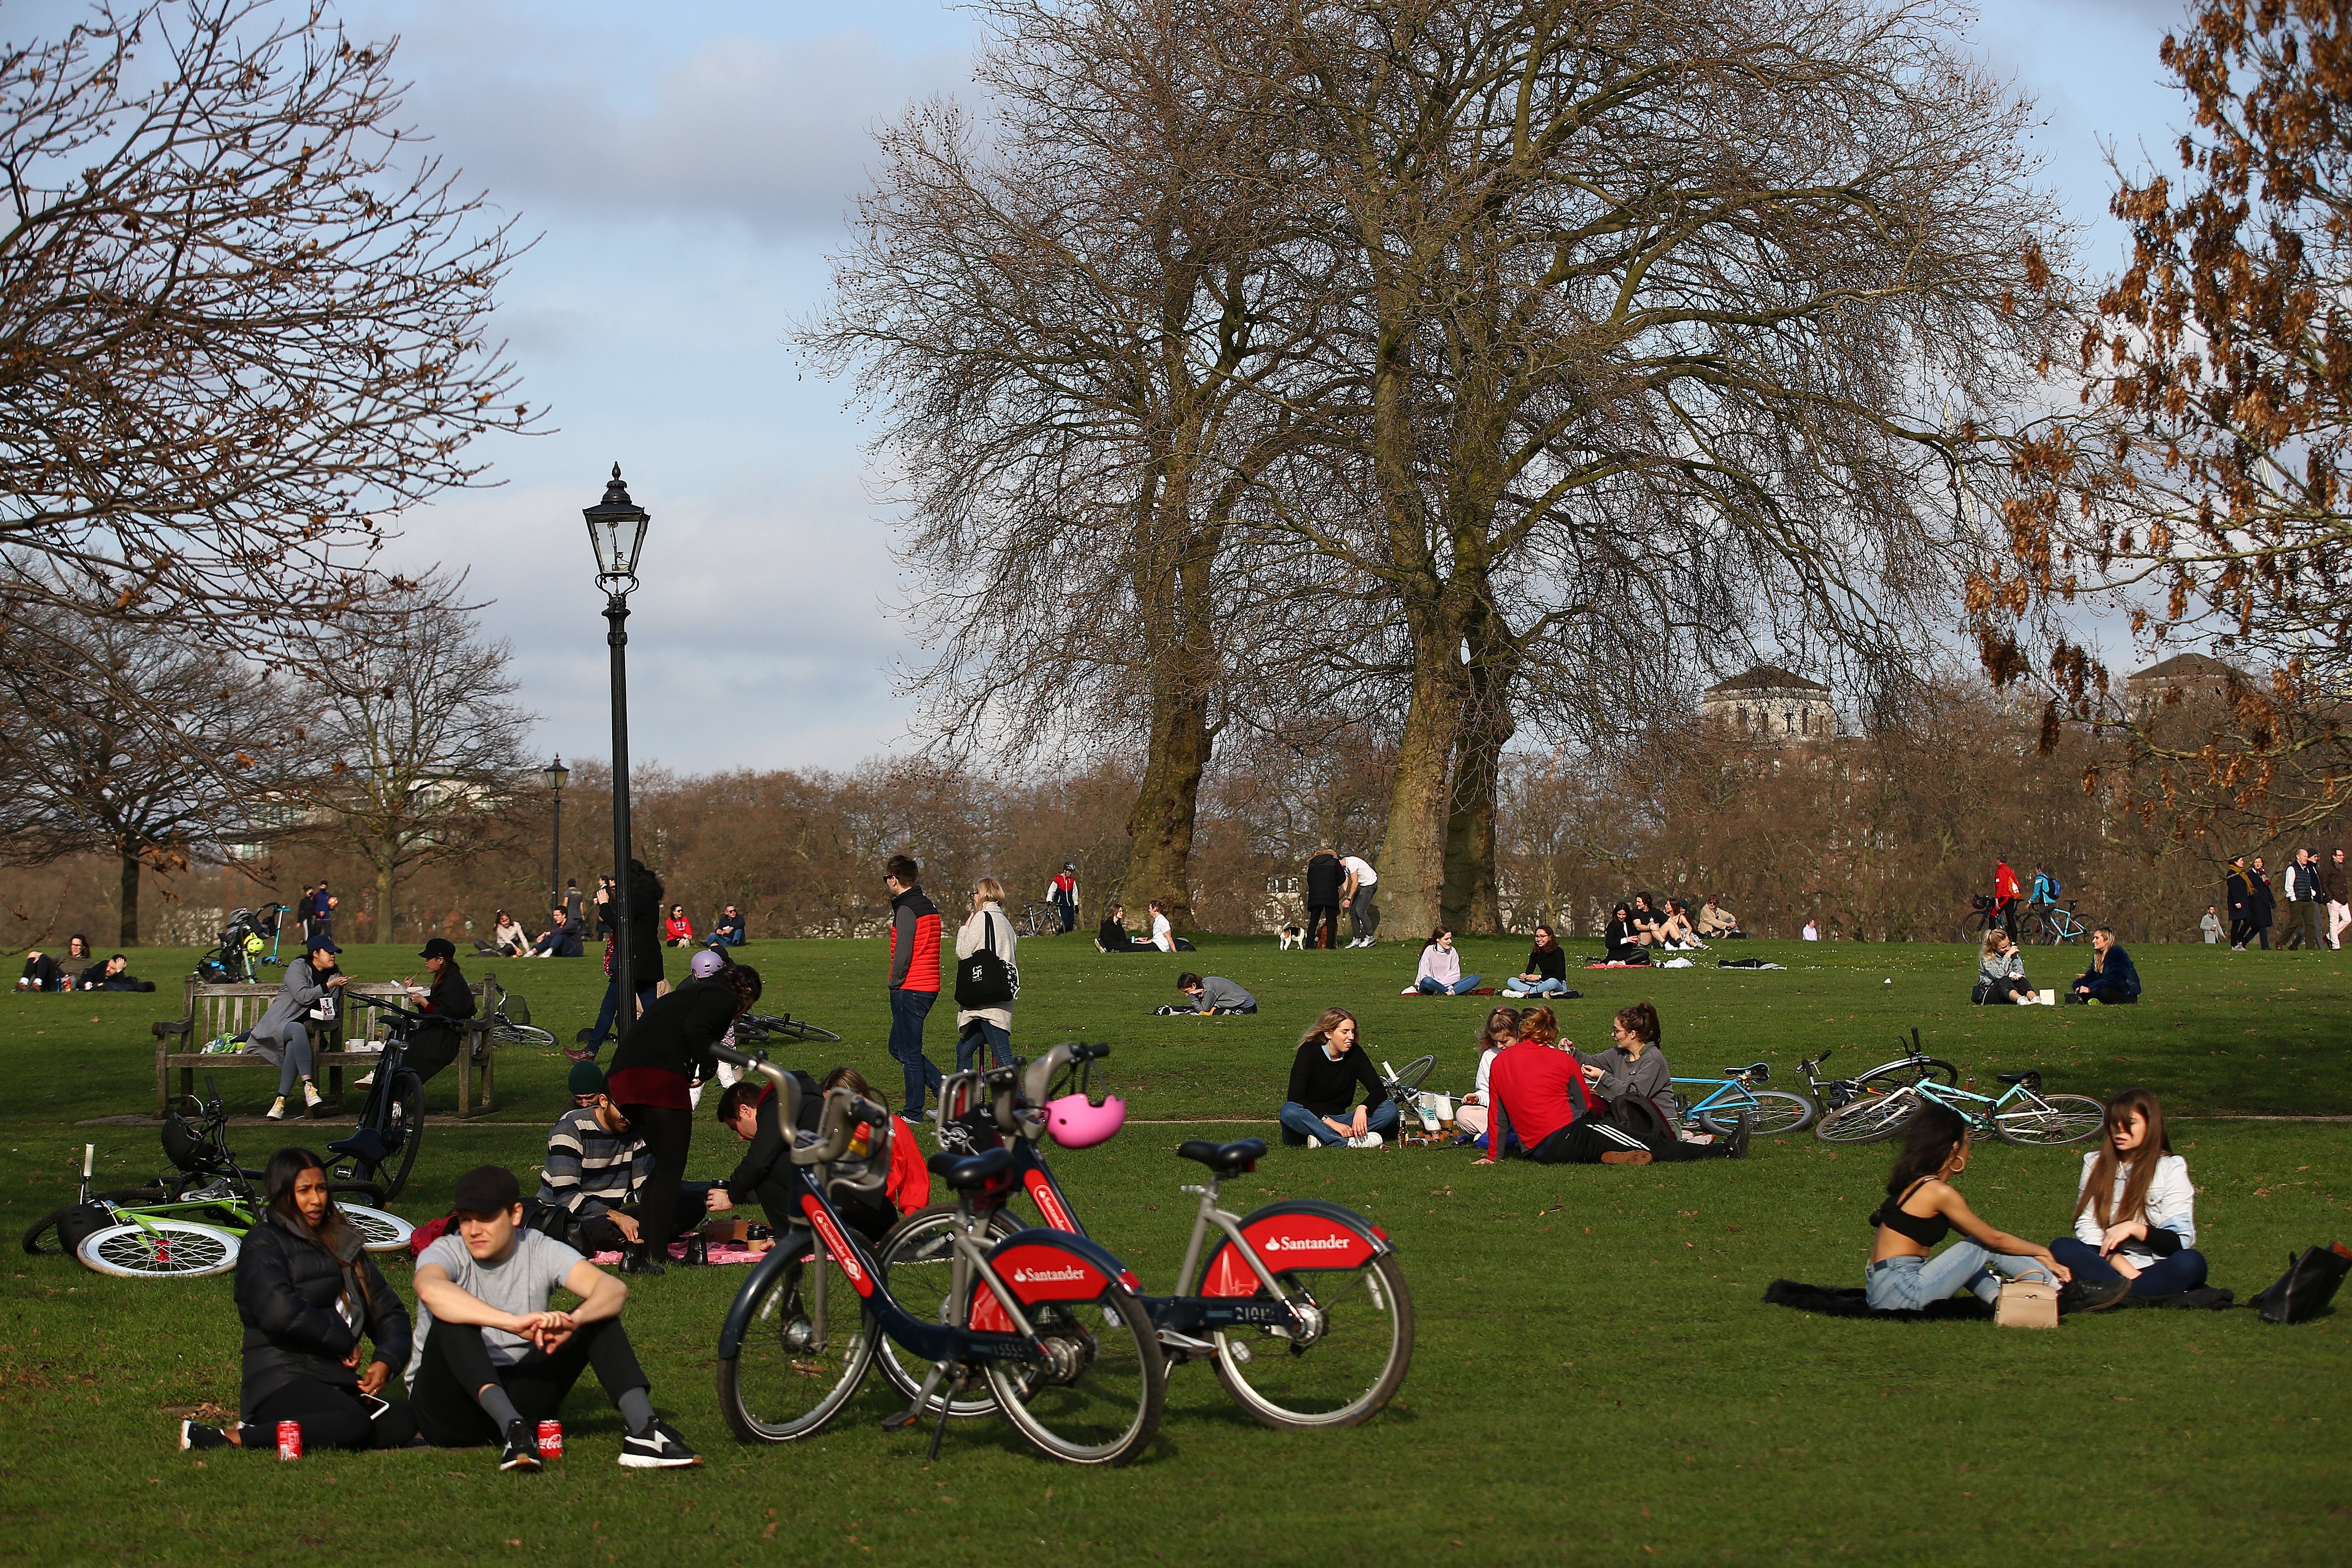 Following a warm weekend, London could be 17C by Wednesday